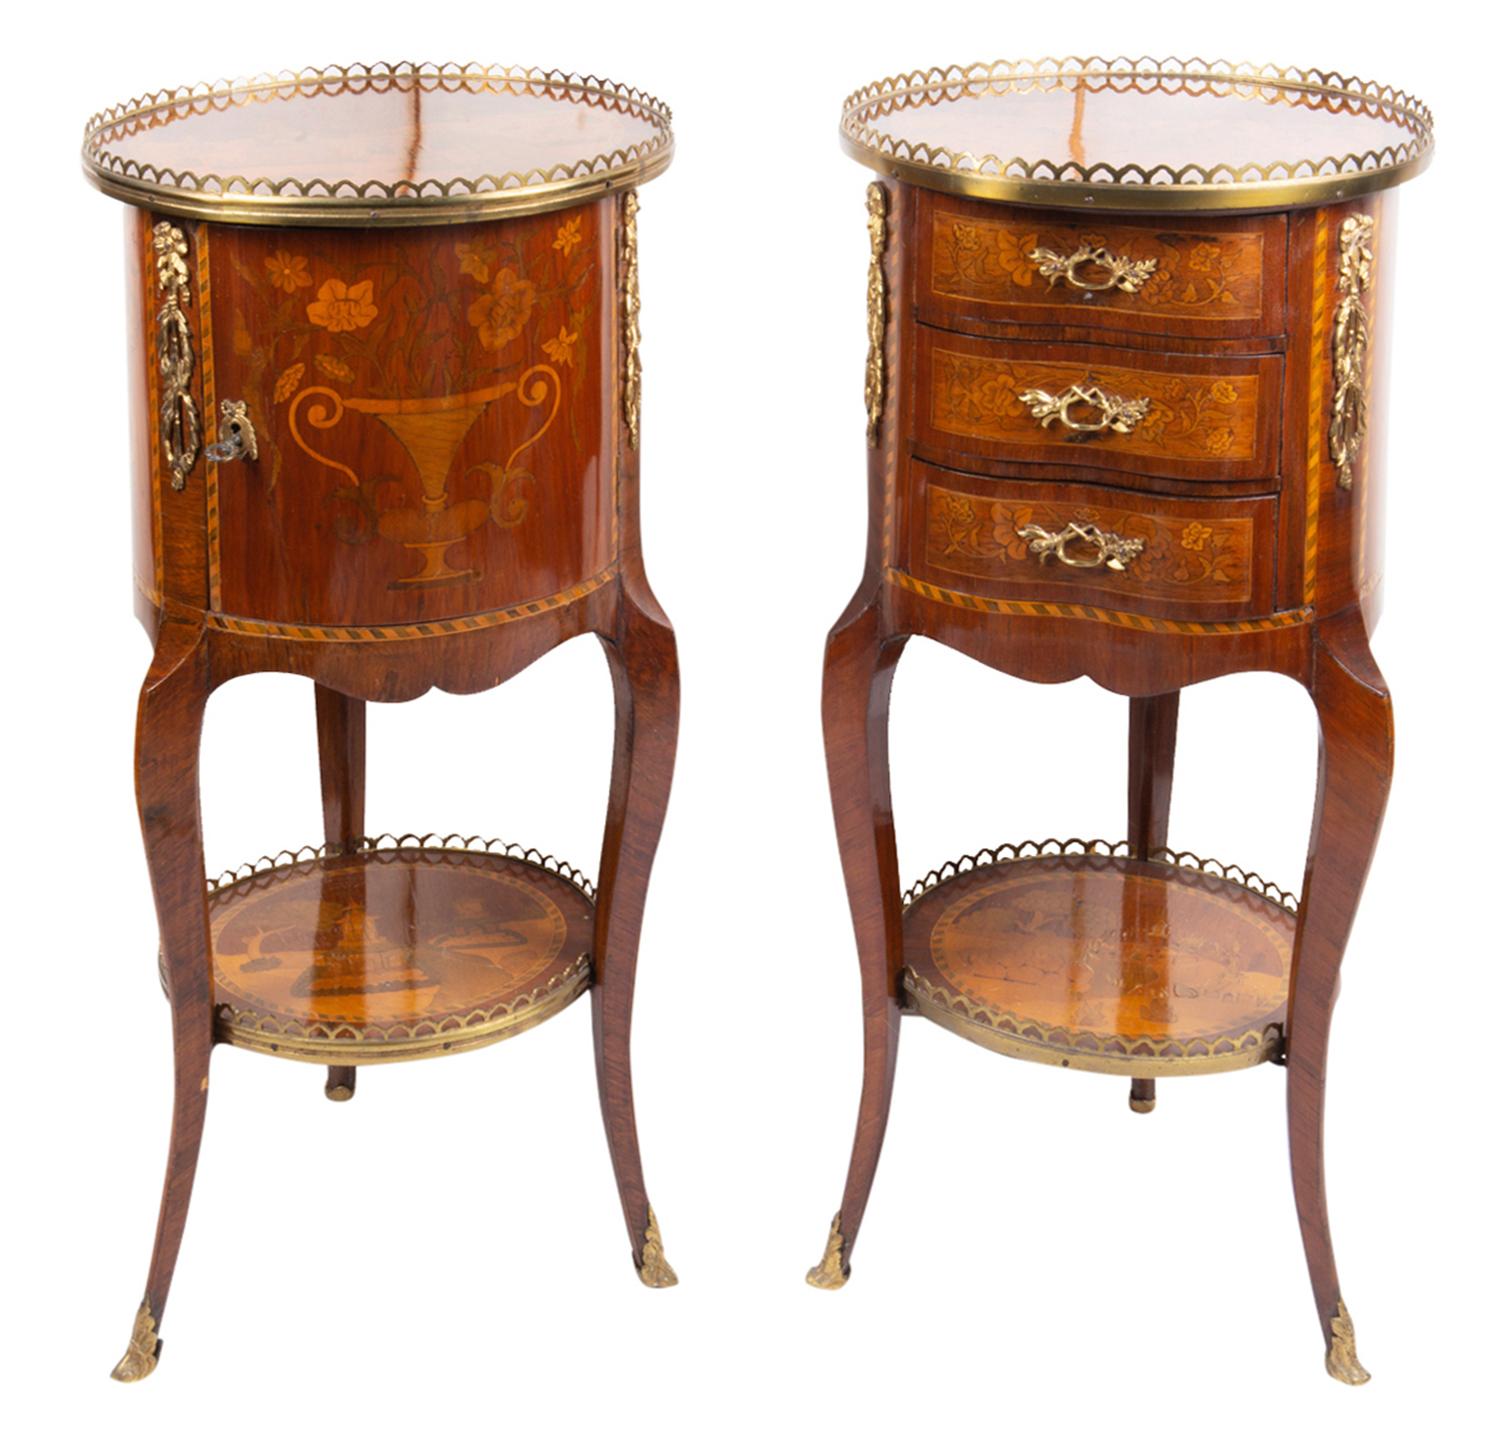 Inlay Pair of French Inlaid Side Cabinets, Louis XVI Style, circa 1900